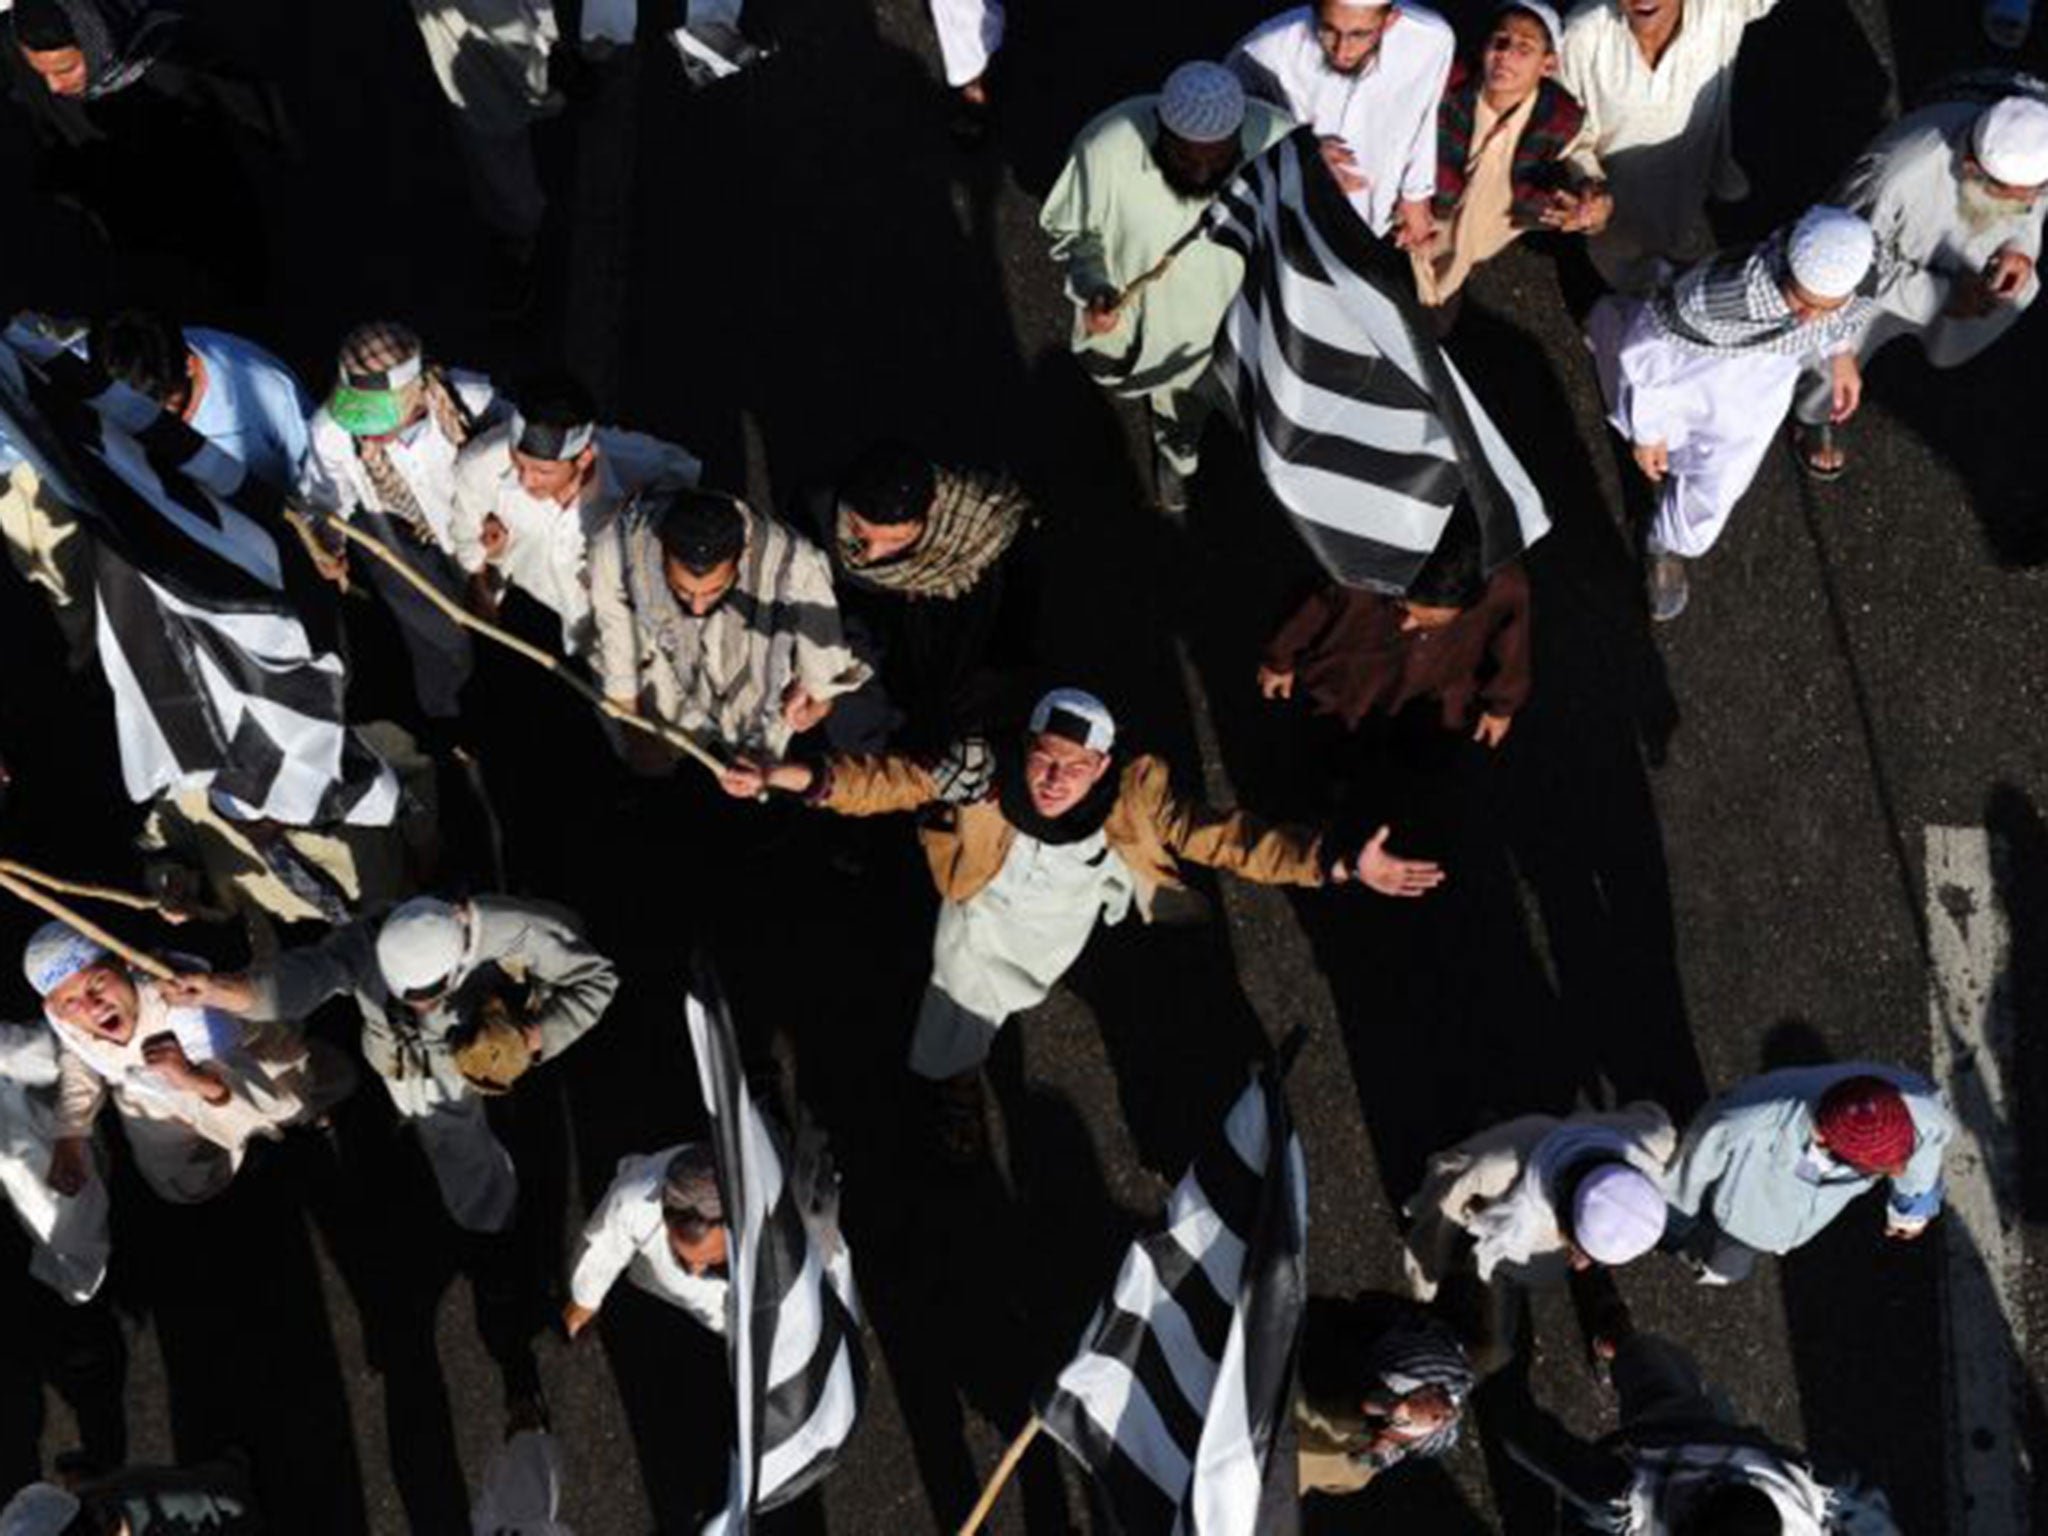 Pakistani Islamists shout slogans as they march during a rally in Karachi against the amendment of the Blasphemy law. More than 50,000 people rallied in Pakistan's southern city against the controversial reform of the law that was behind the killing of Mu